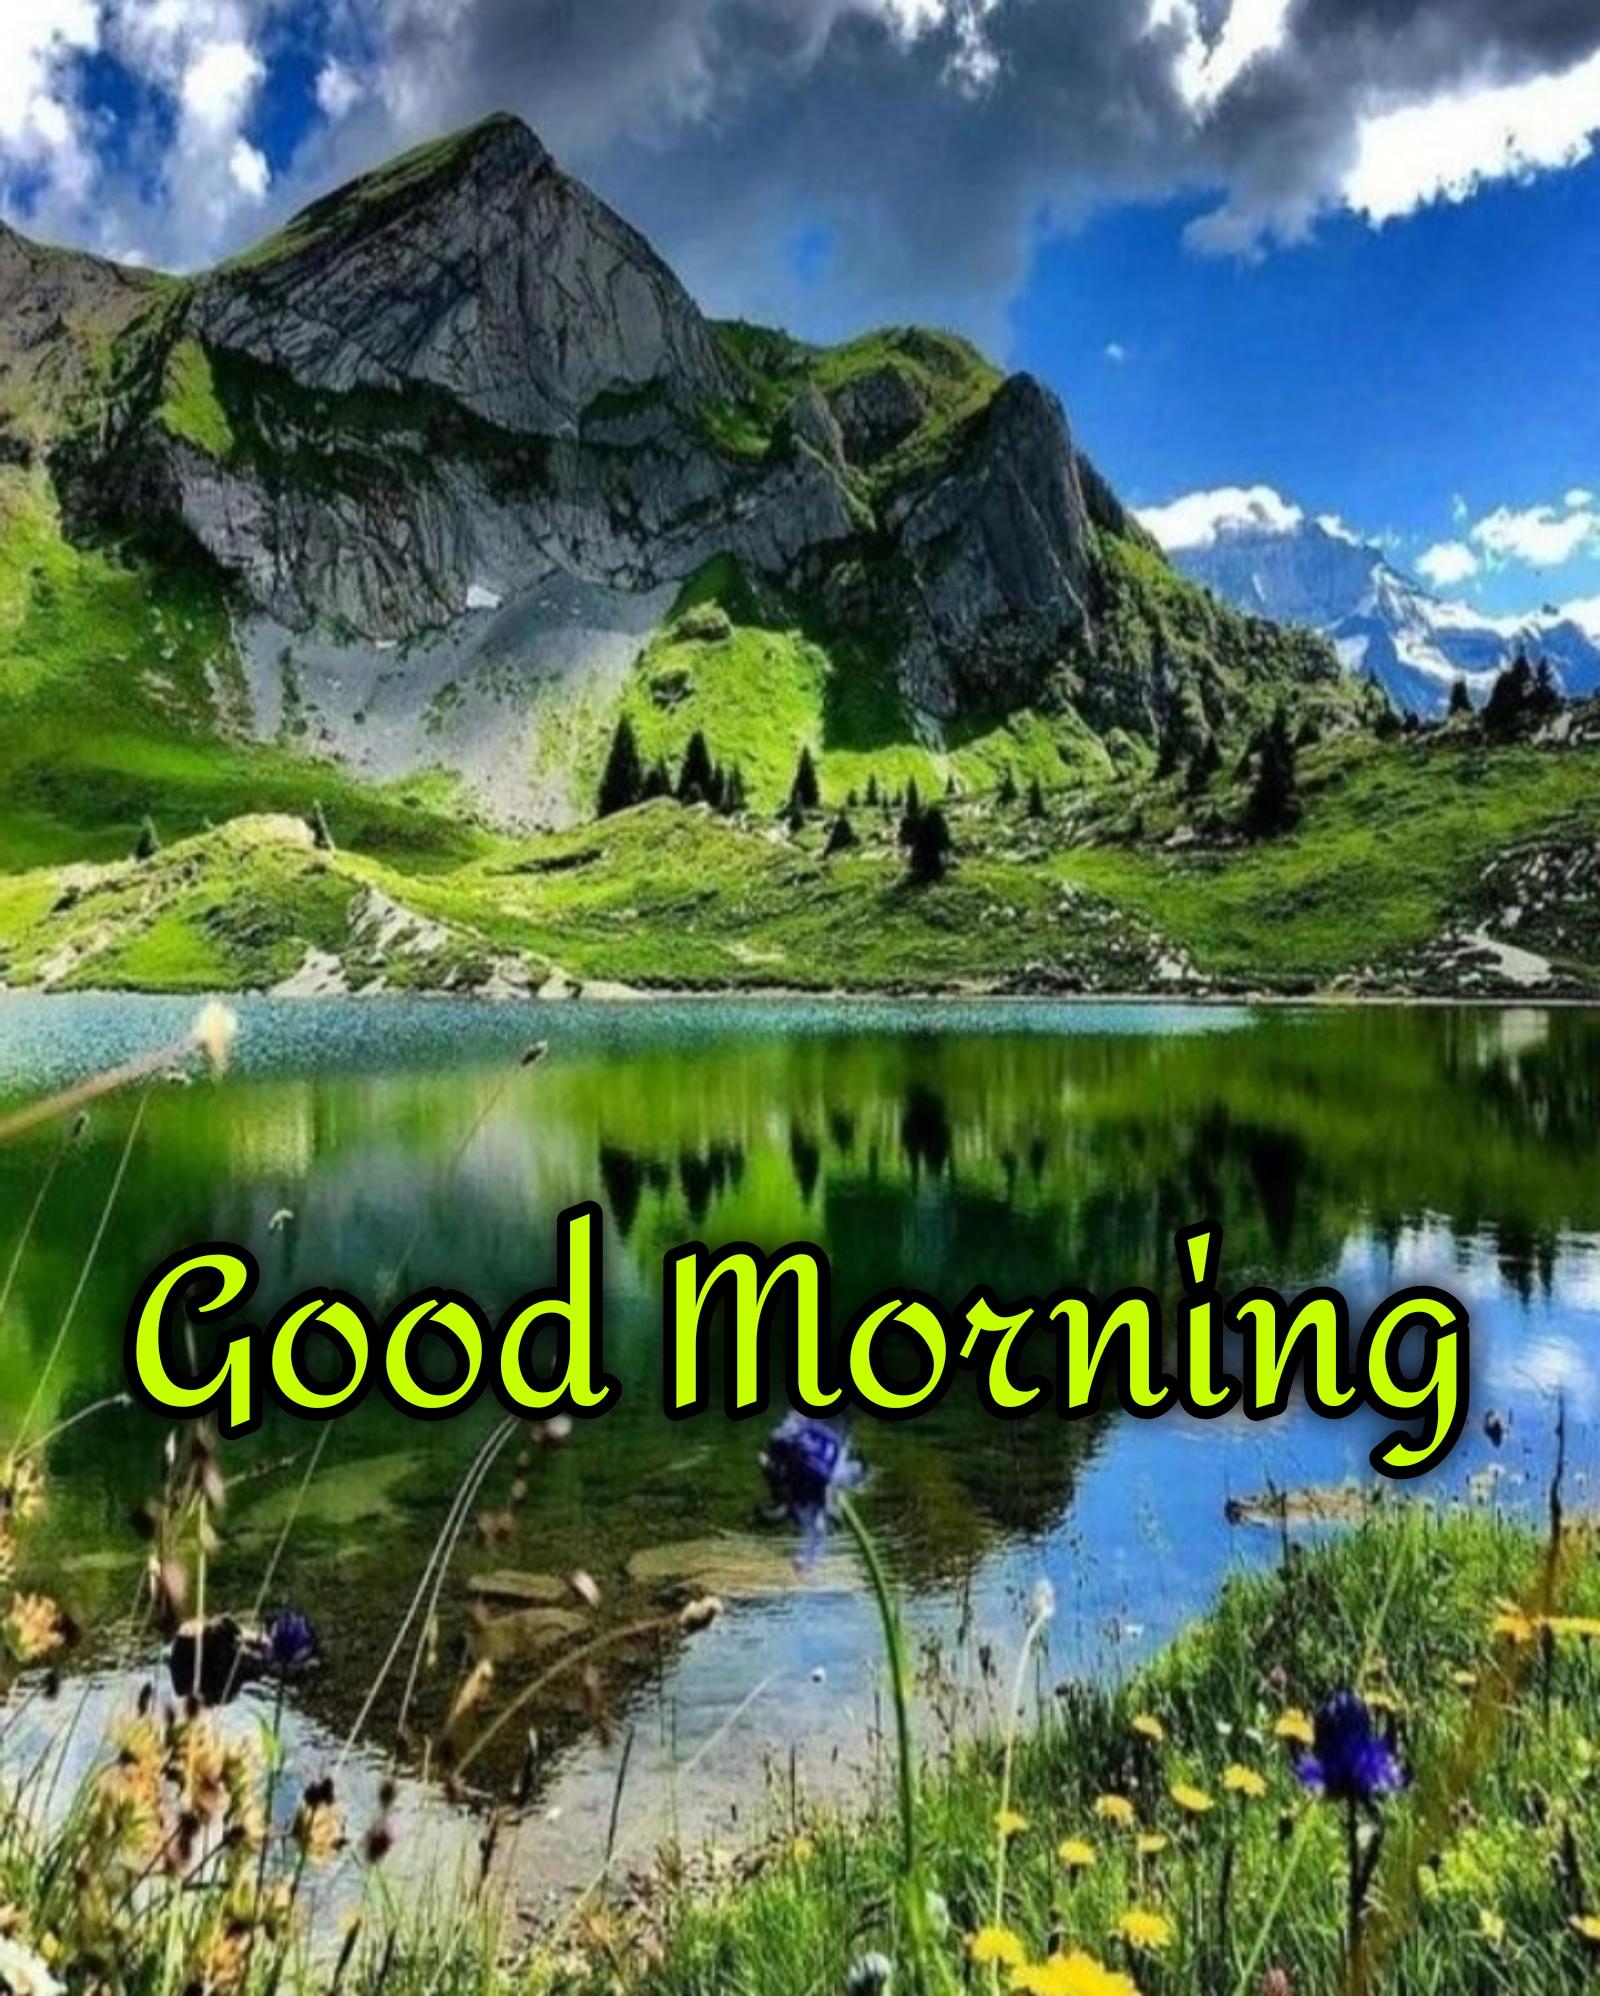 Good Morning Scenery Images